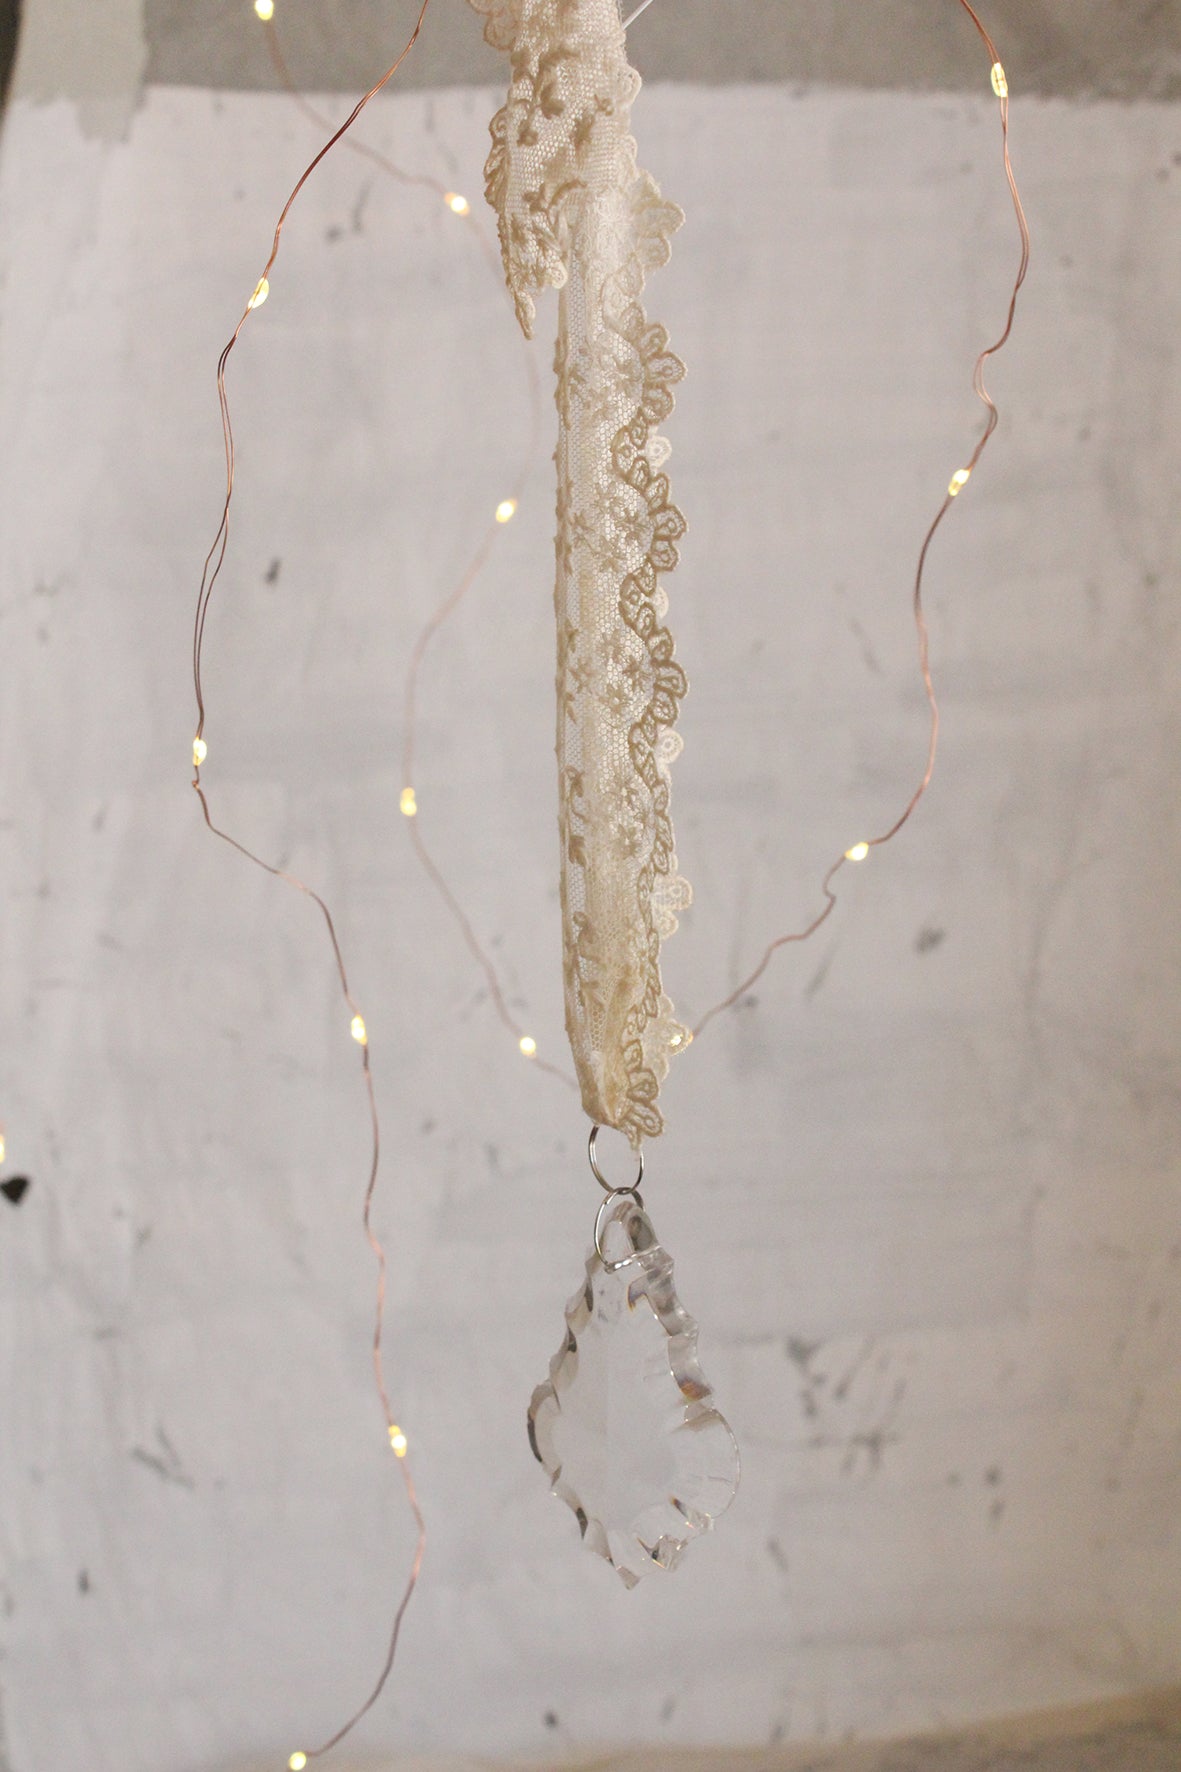 Antique French Glass Chandelier Drop With An Antique Lace Hanger